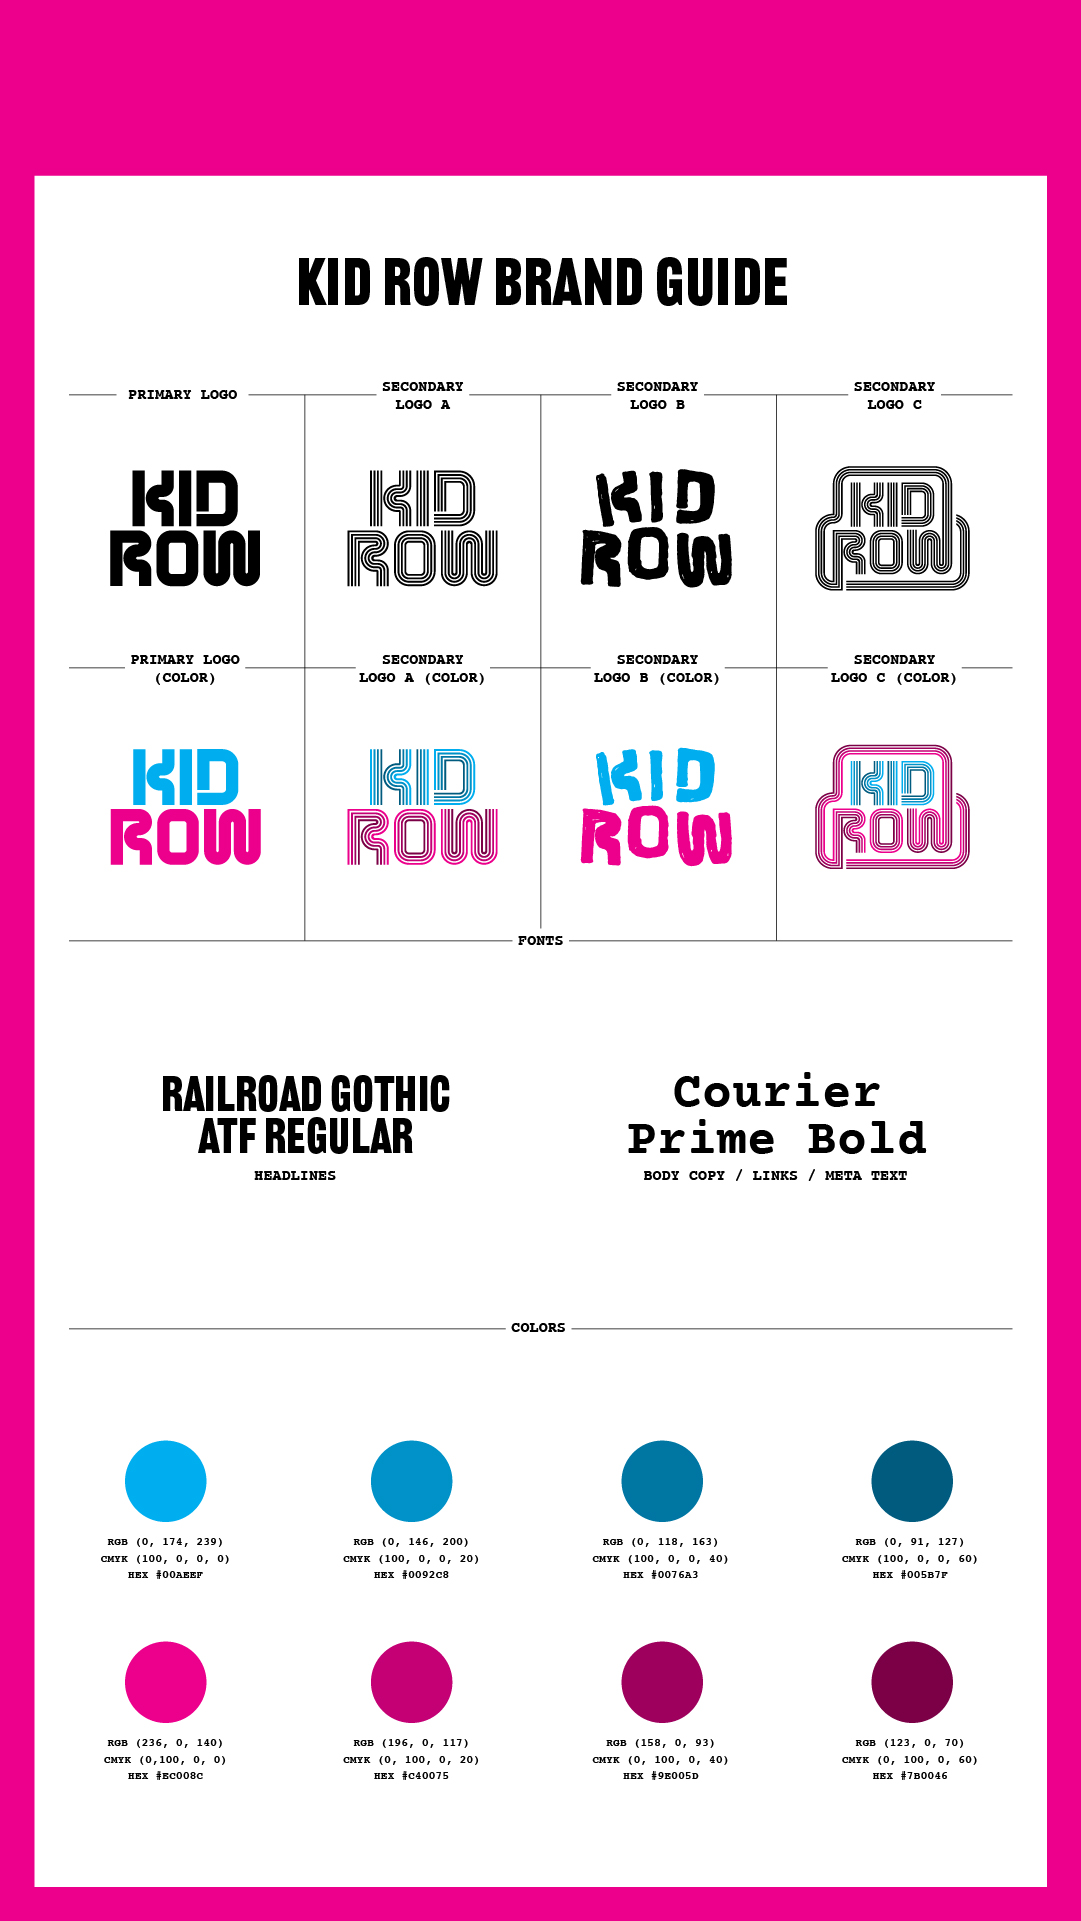 Kid Row brand guide layout